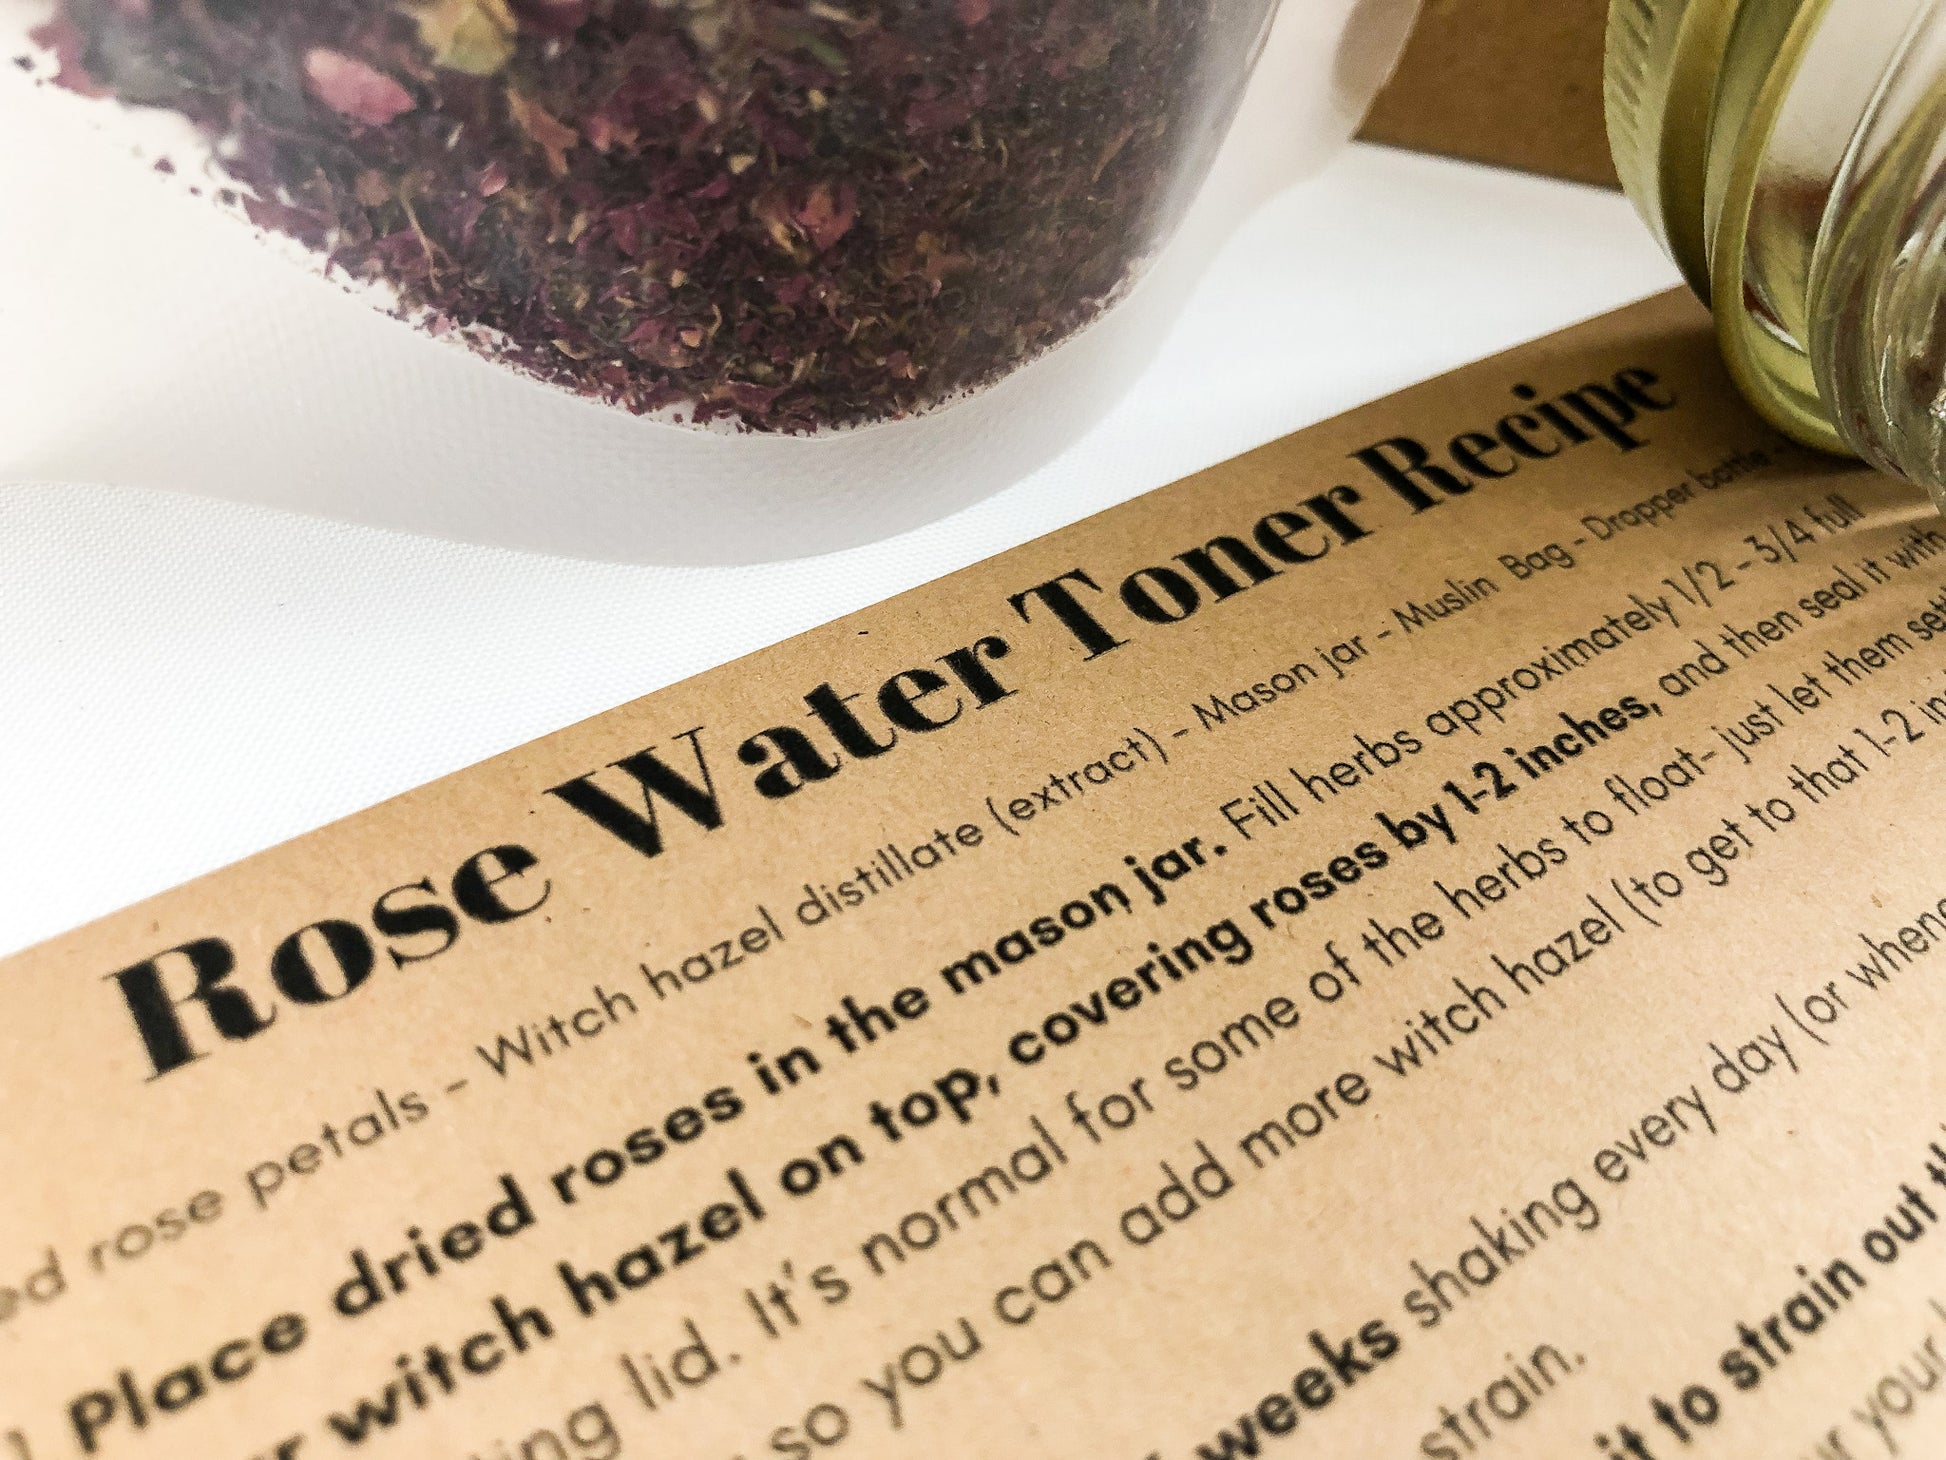 rose water toner recipe, image of recipe upclose at an angle with dried roses in a bag in upper part of image